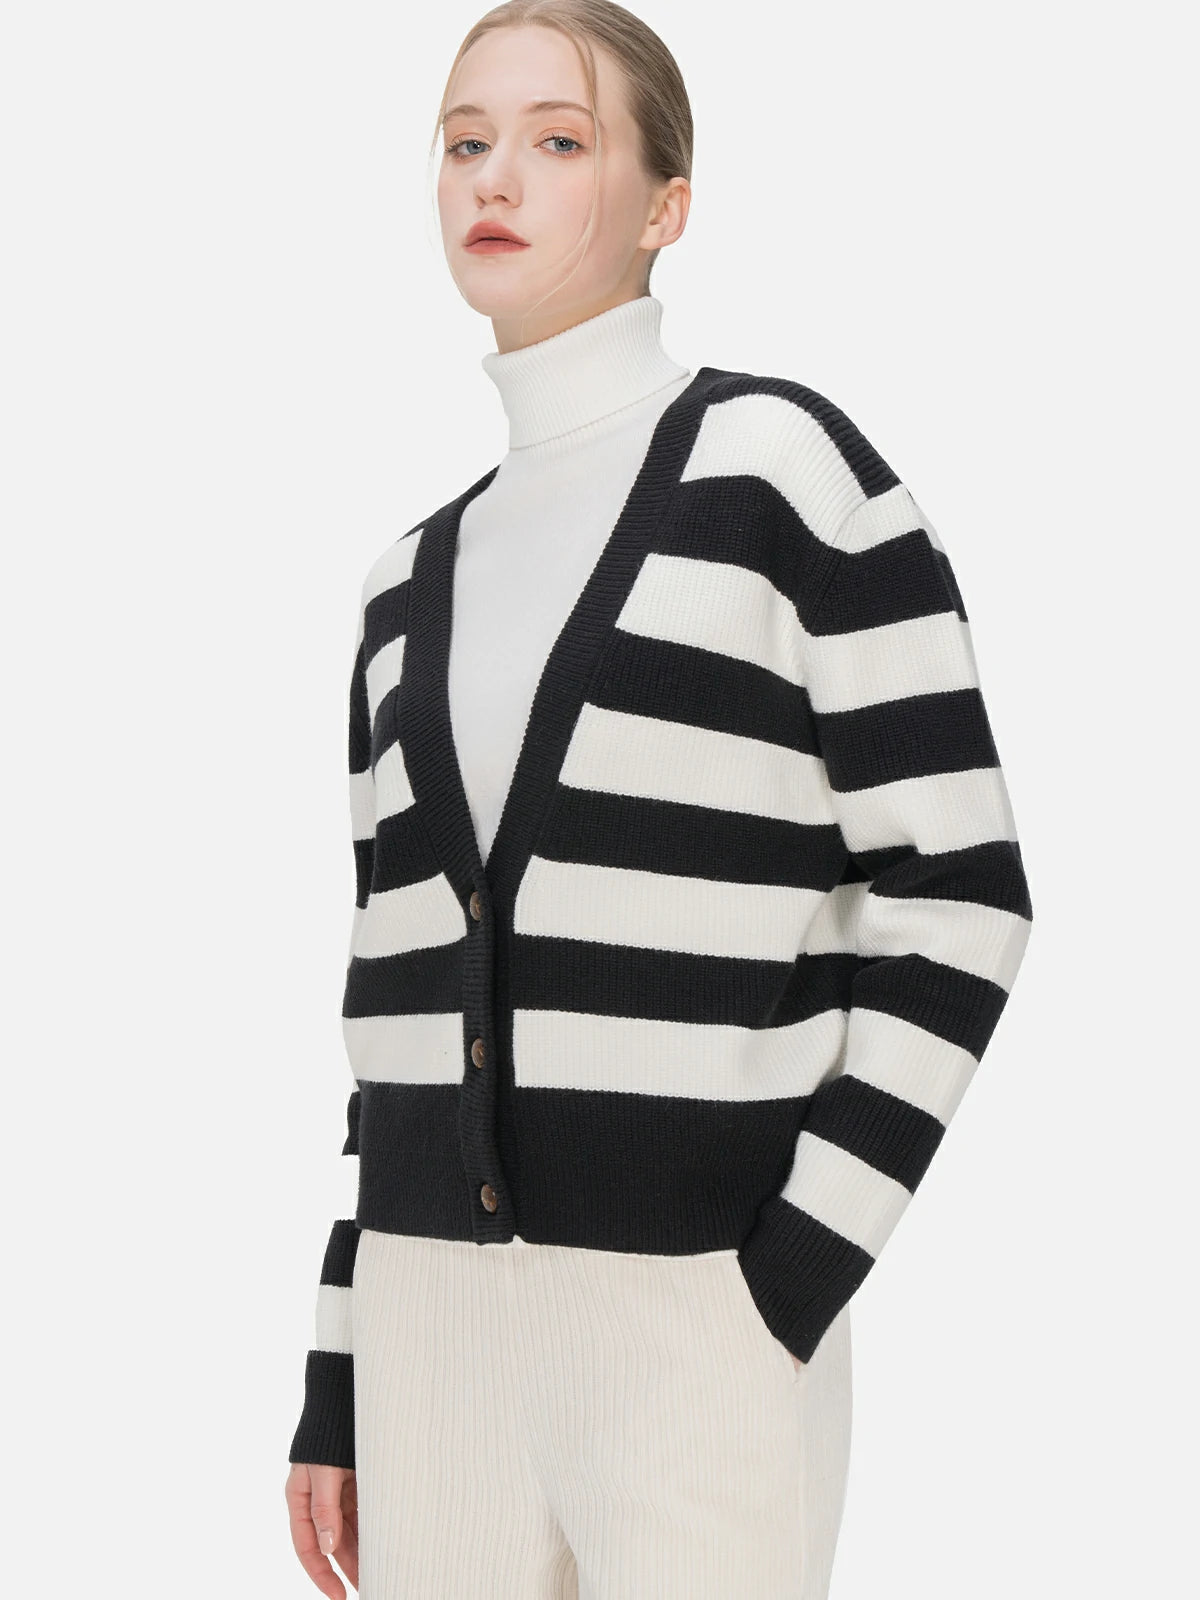 Versatile styling options await with this V-neck cardigan in a loose fit, featuring black and white stripes, button details, and a design that effortlessly combines sophistication and ease.